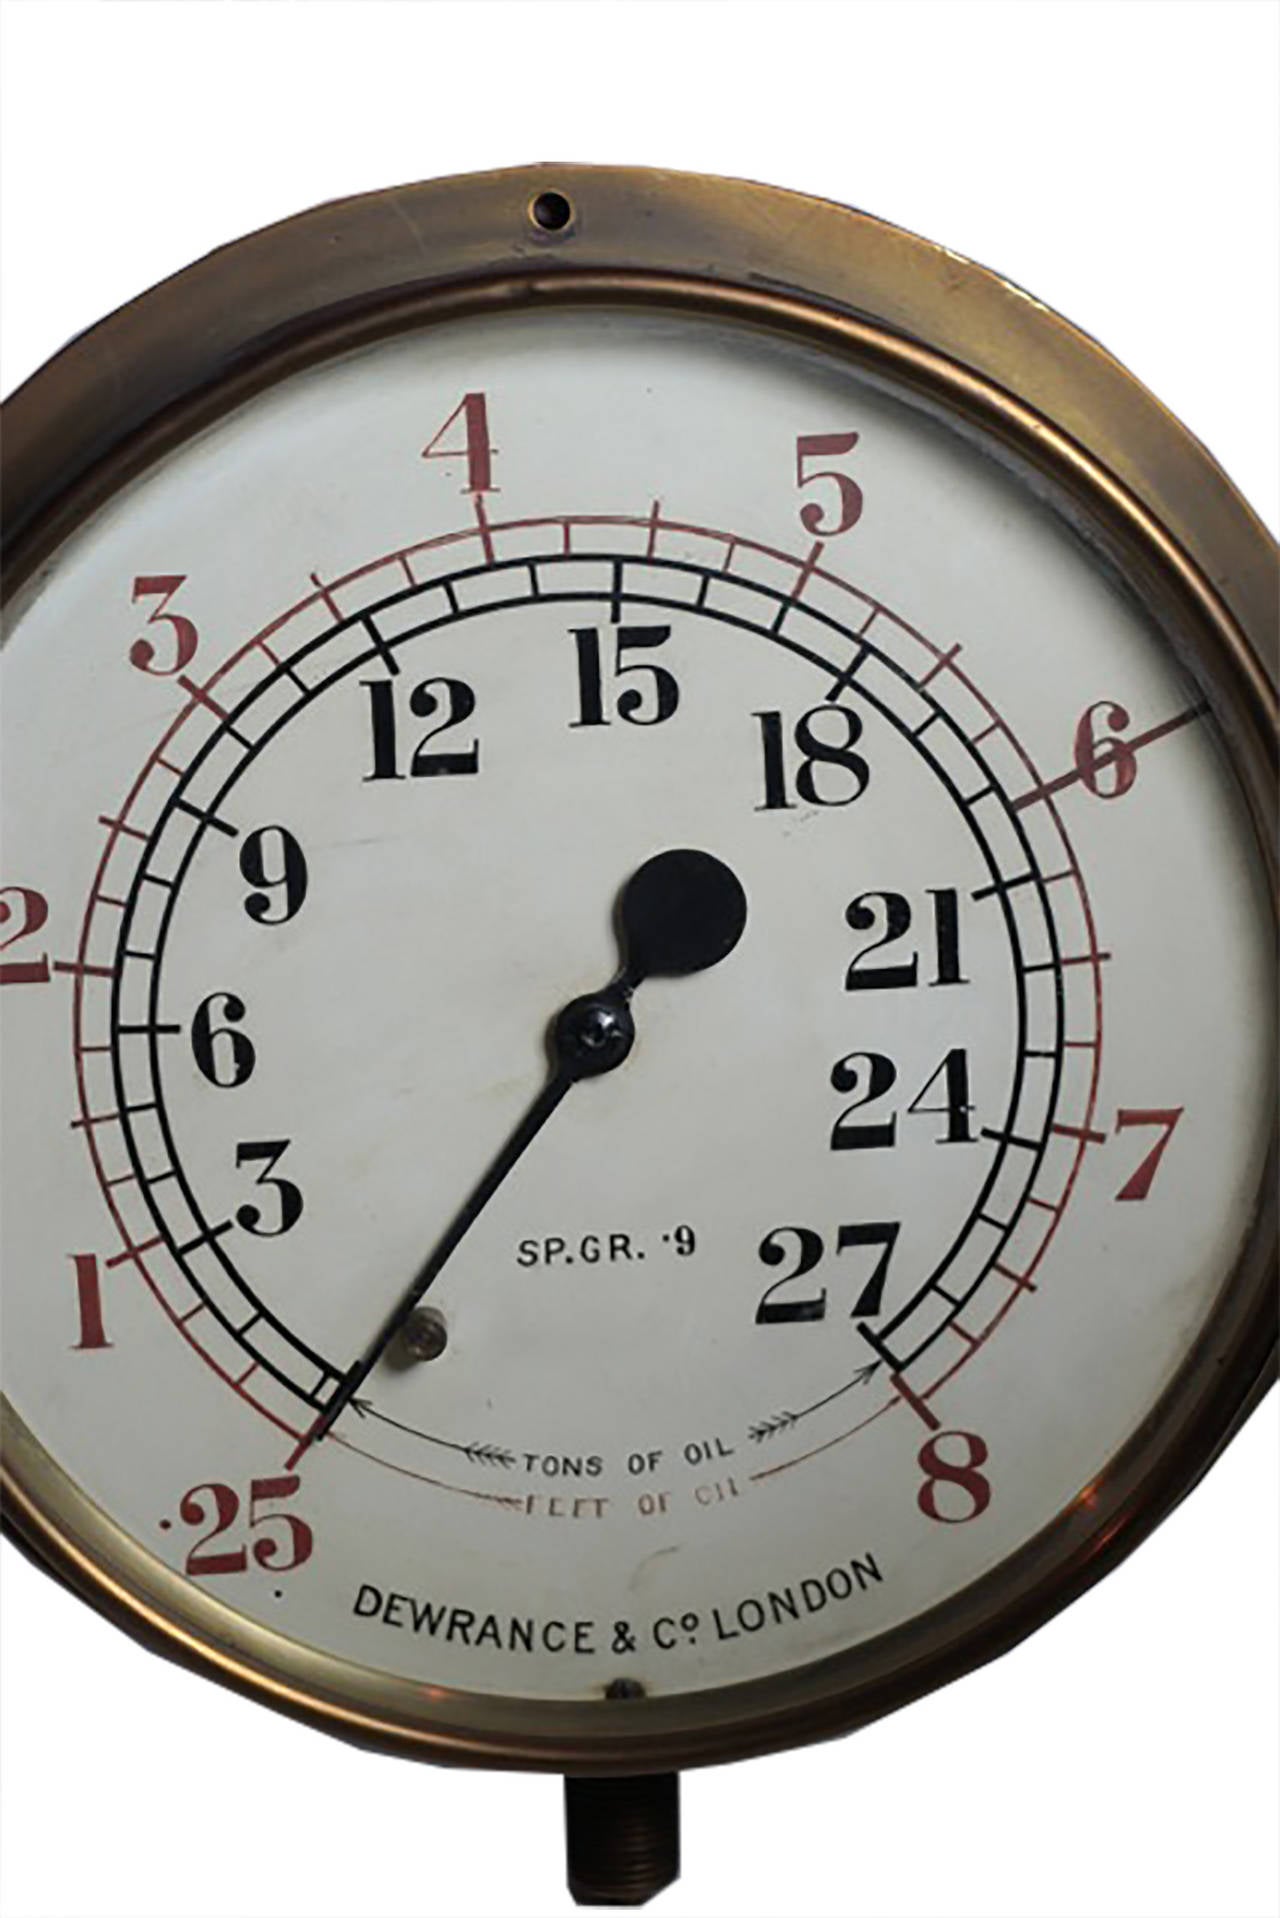 Large, solid brass English pressure gauge by Dewrance and Co., London.